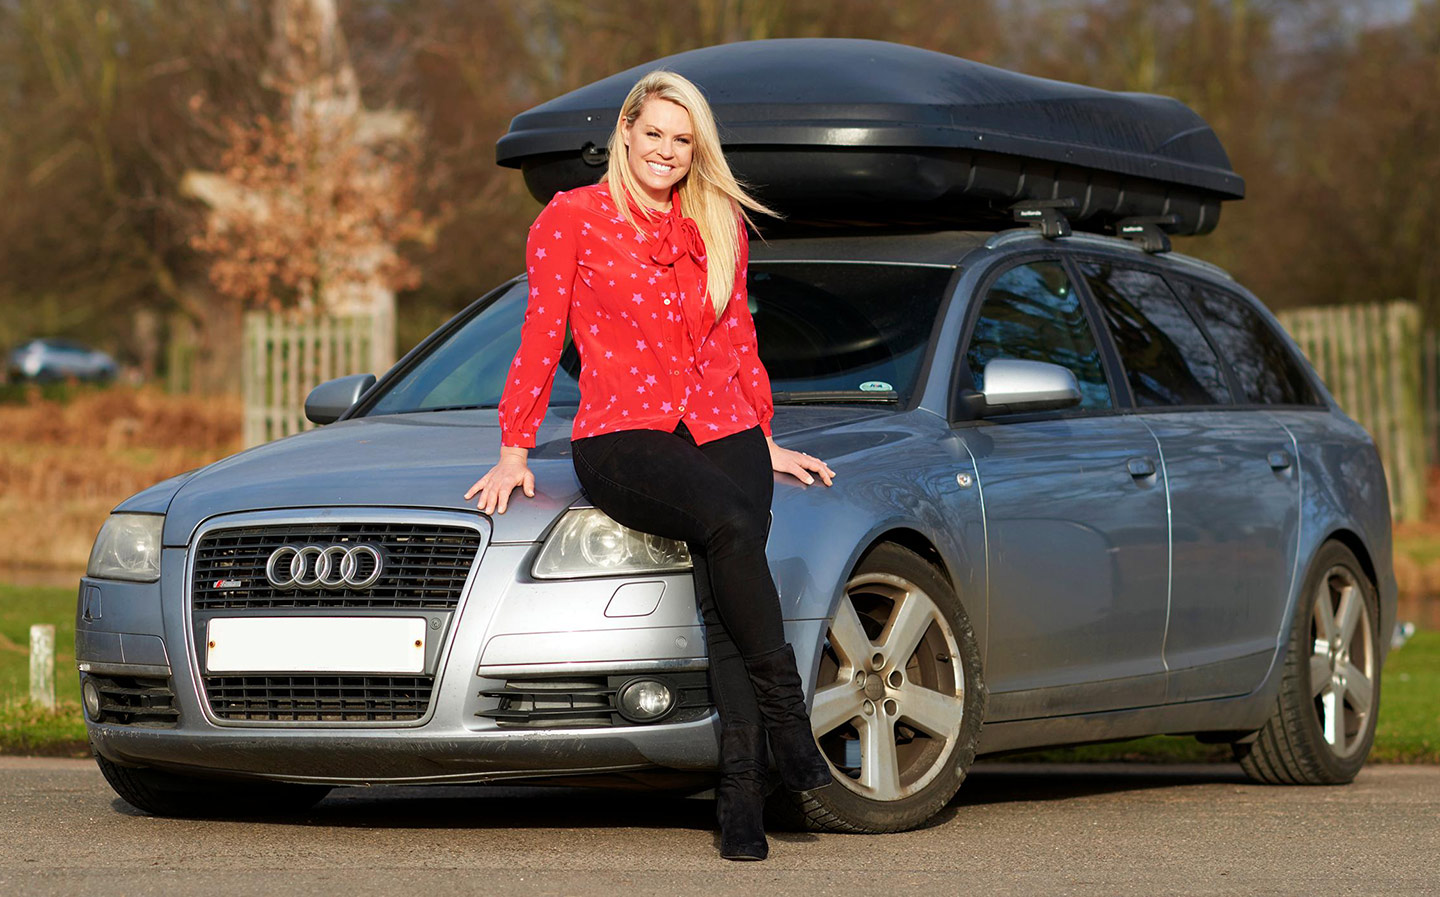 Chemmy Alcott, Olympic Skier and Ski Sunday presenter, interview about her cars and career for Sunday Times Driving